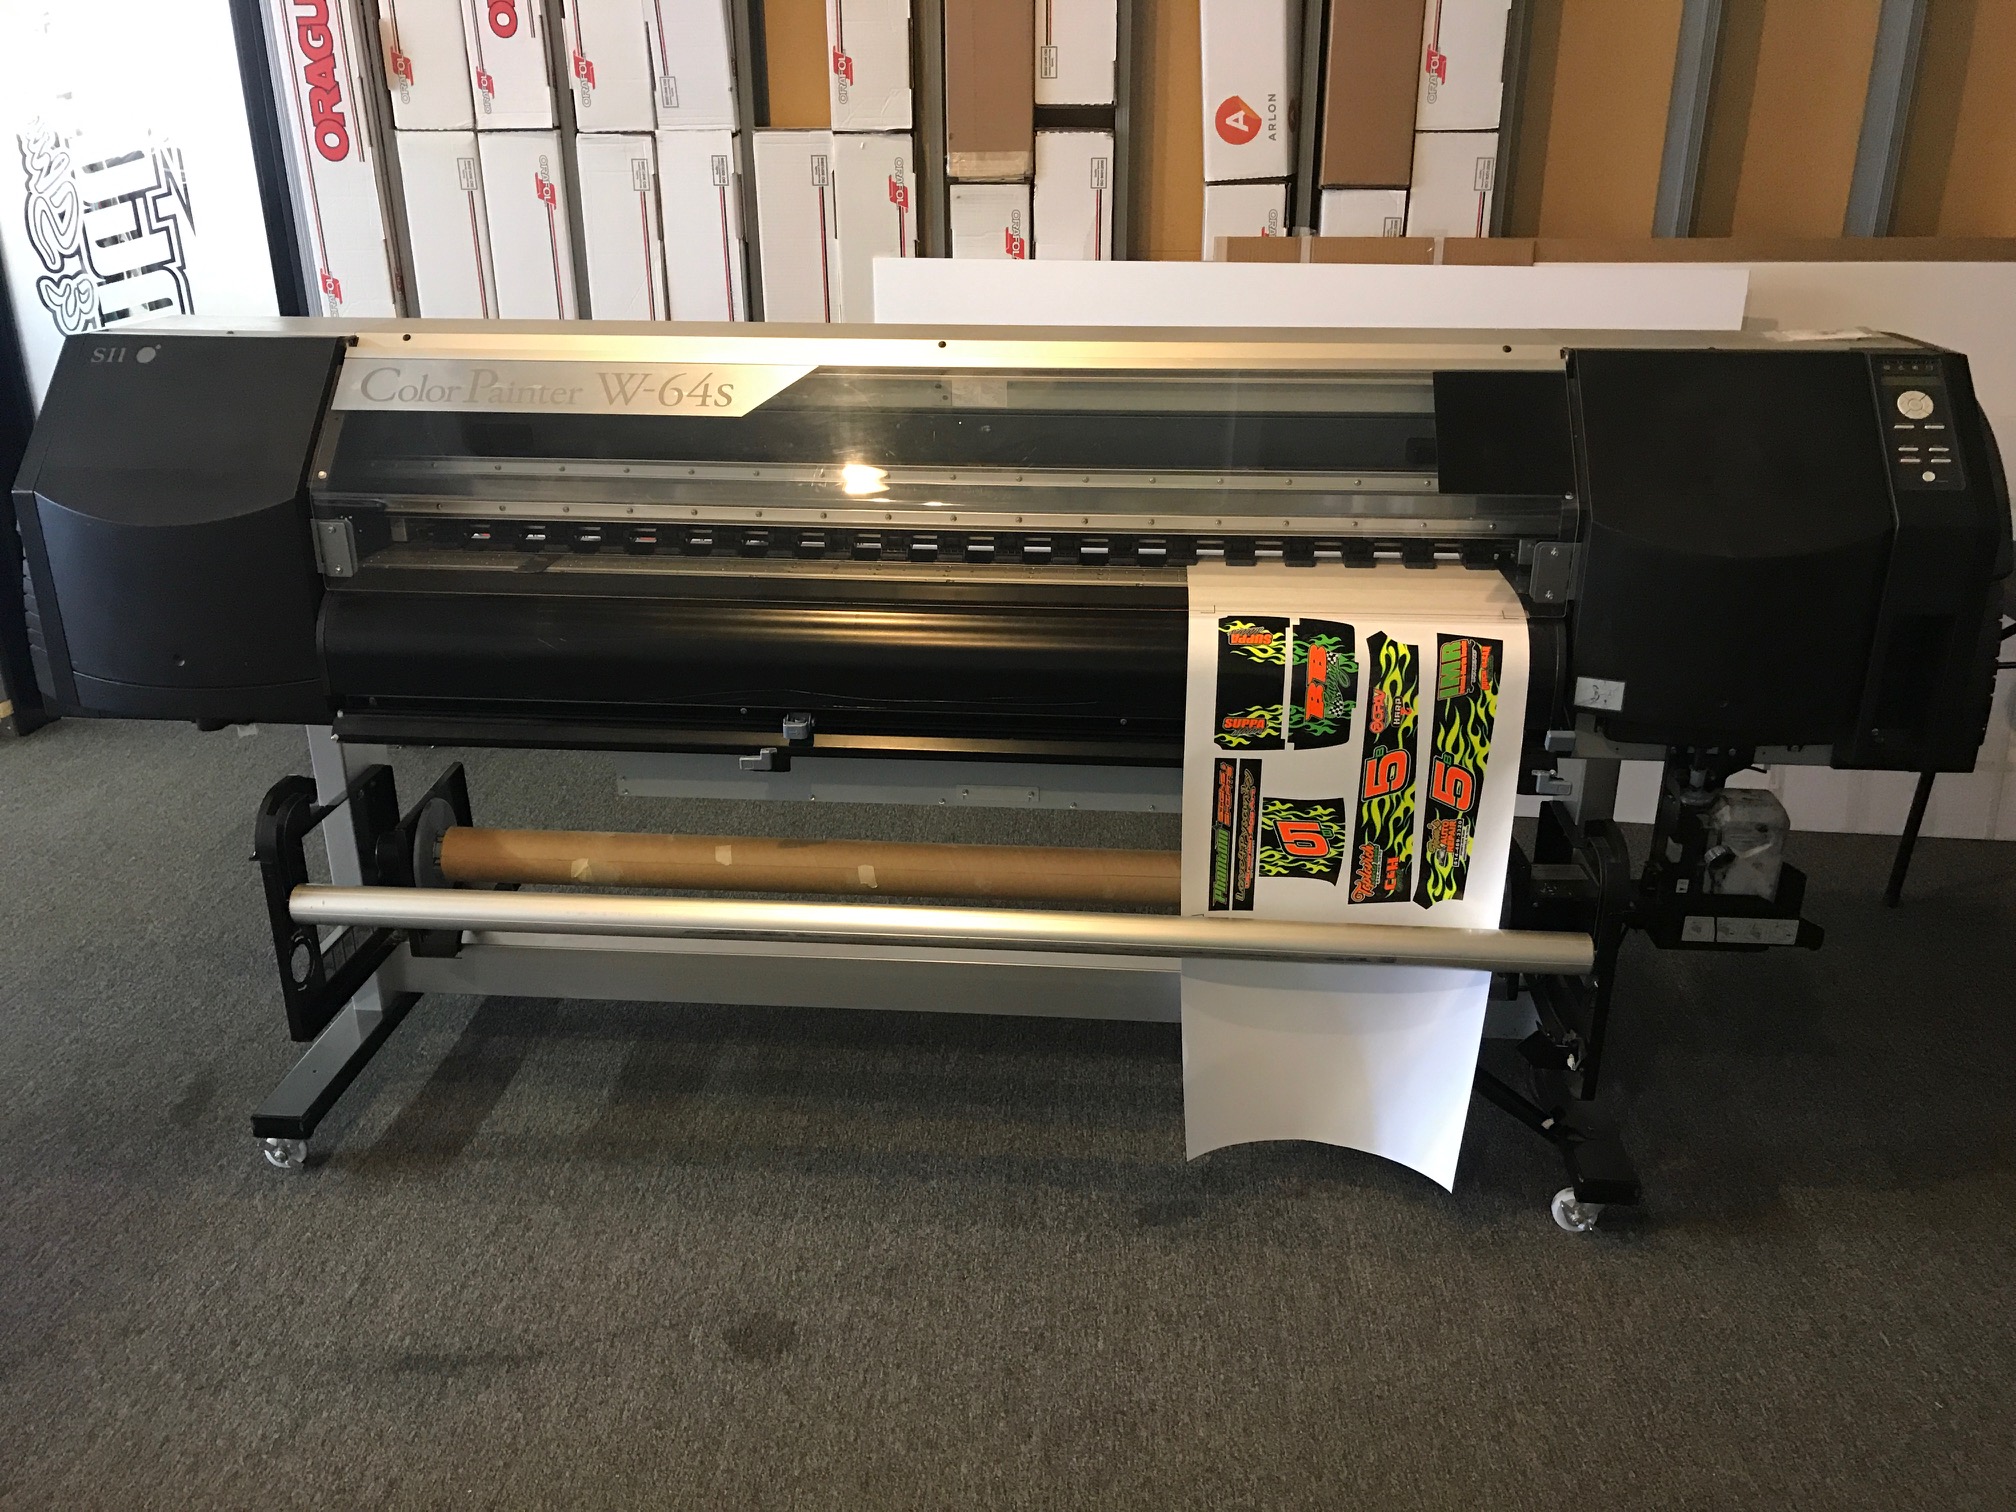 PA - Seiko/Oki Data ColorPainter W-64s : Largest Forum for  Signmaking Professionals